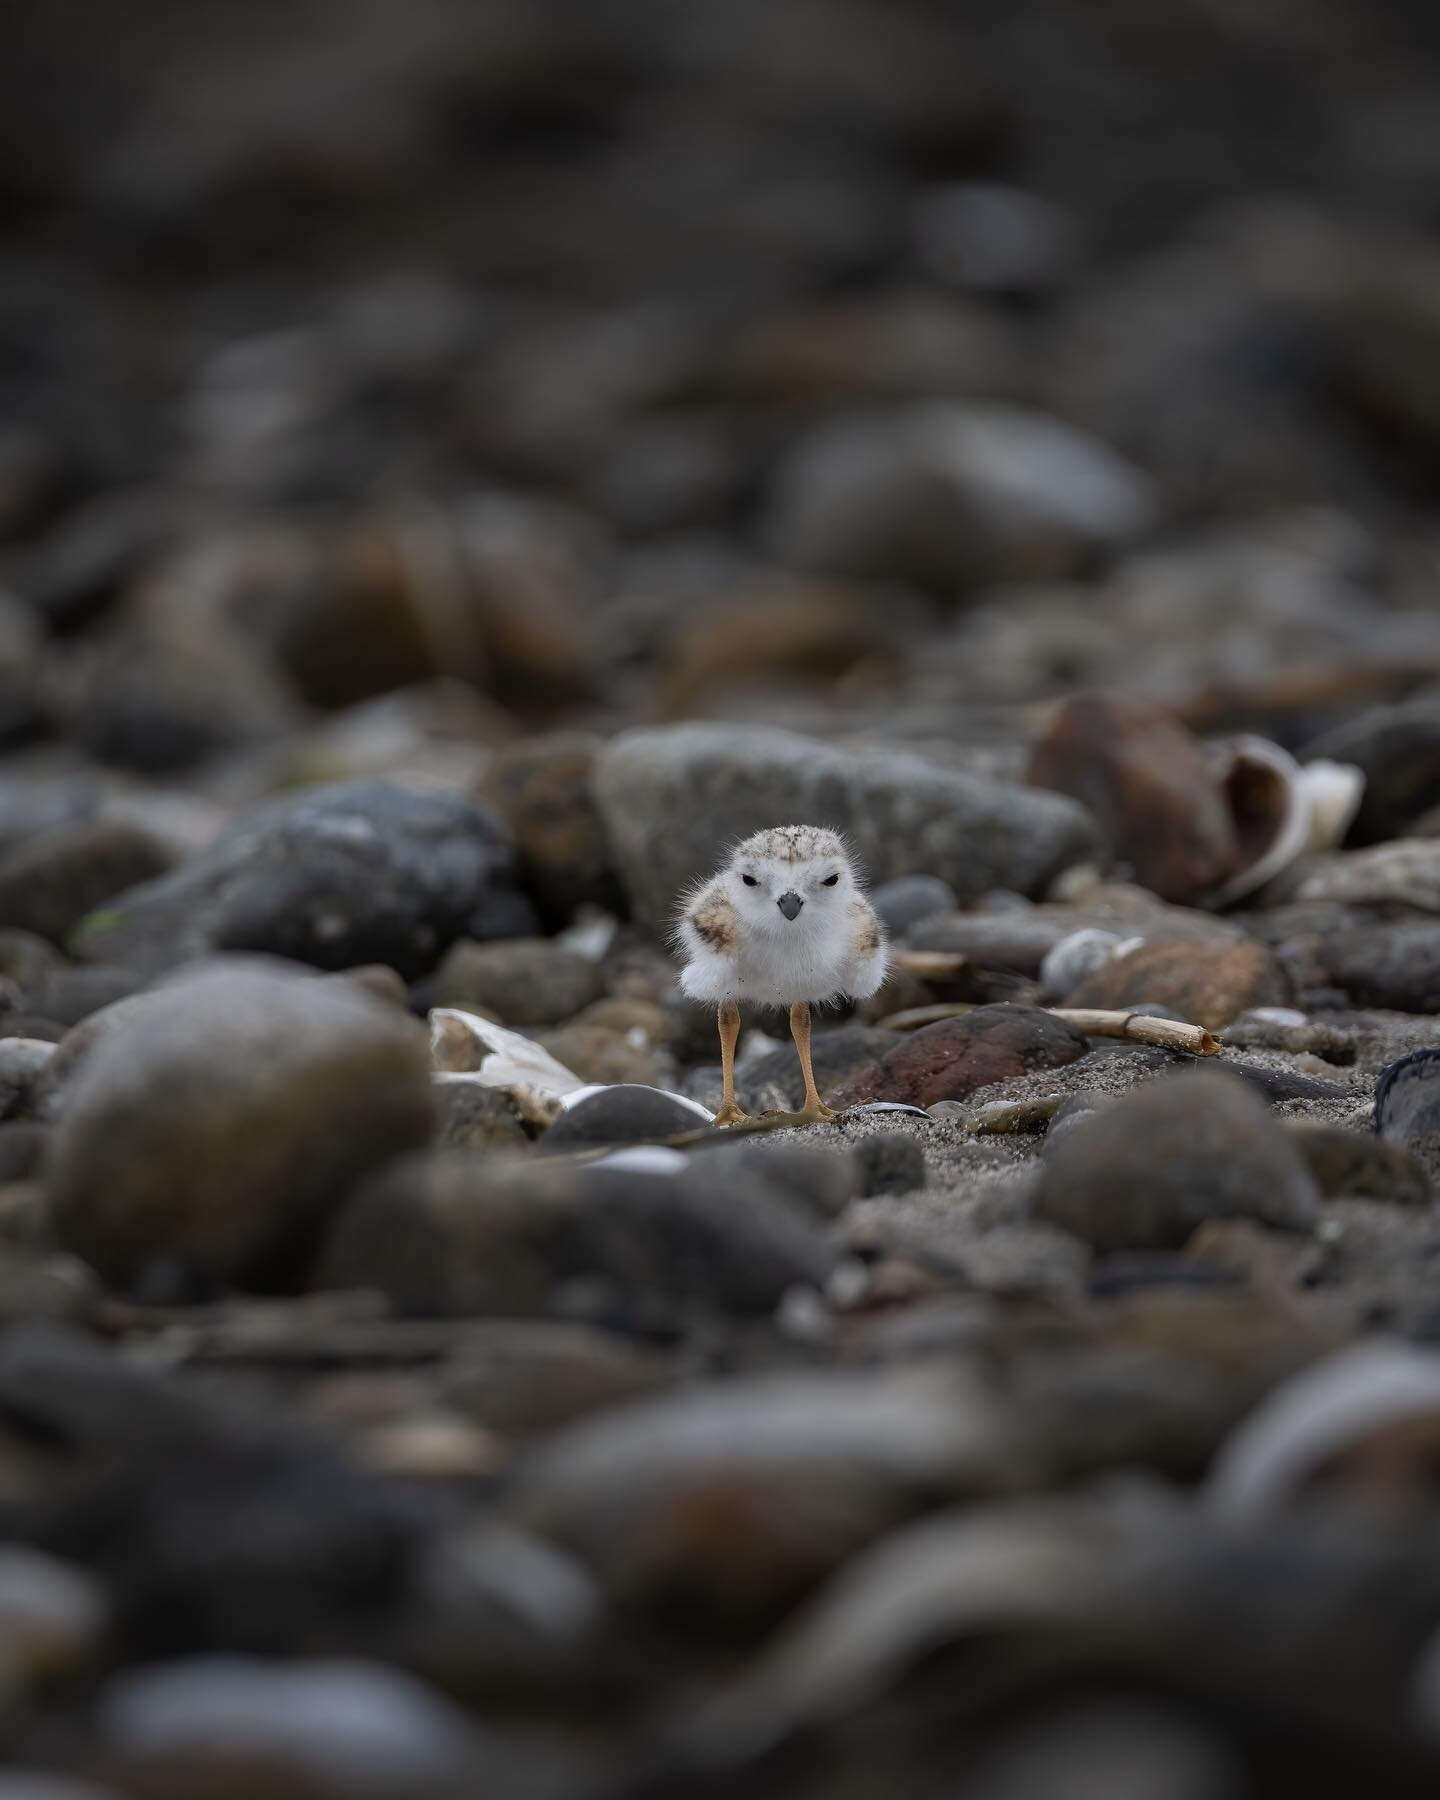 Piping plovers can live up to 15 years in the wild!! If you happen to walk to close to the babies, which is easy to do because of their incredible camouflage, the mothers will swoop in, and cry while dragging one wing in the sand, in the attempt to l